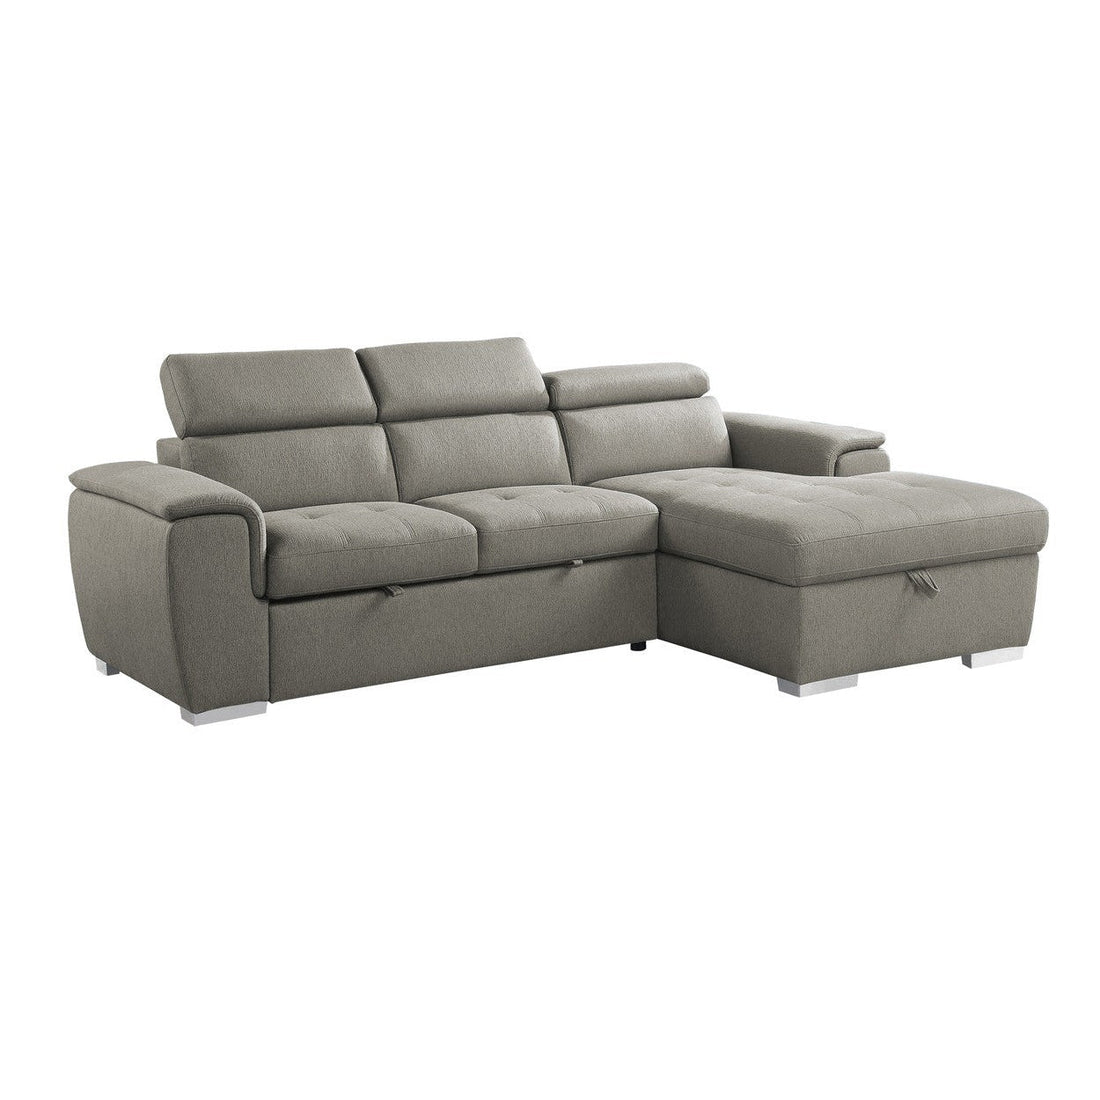 (2)2-Piece Sectional with Pull-out Bed and Adjustable Headrests 9355BR*22LRC